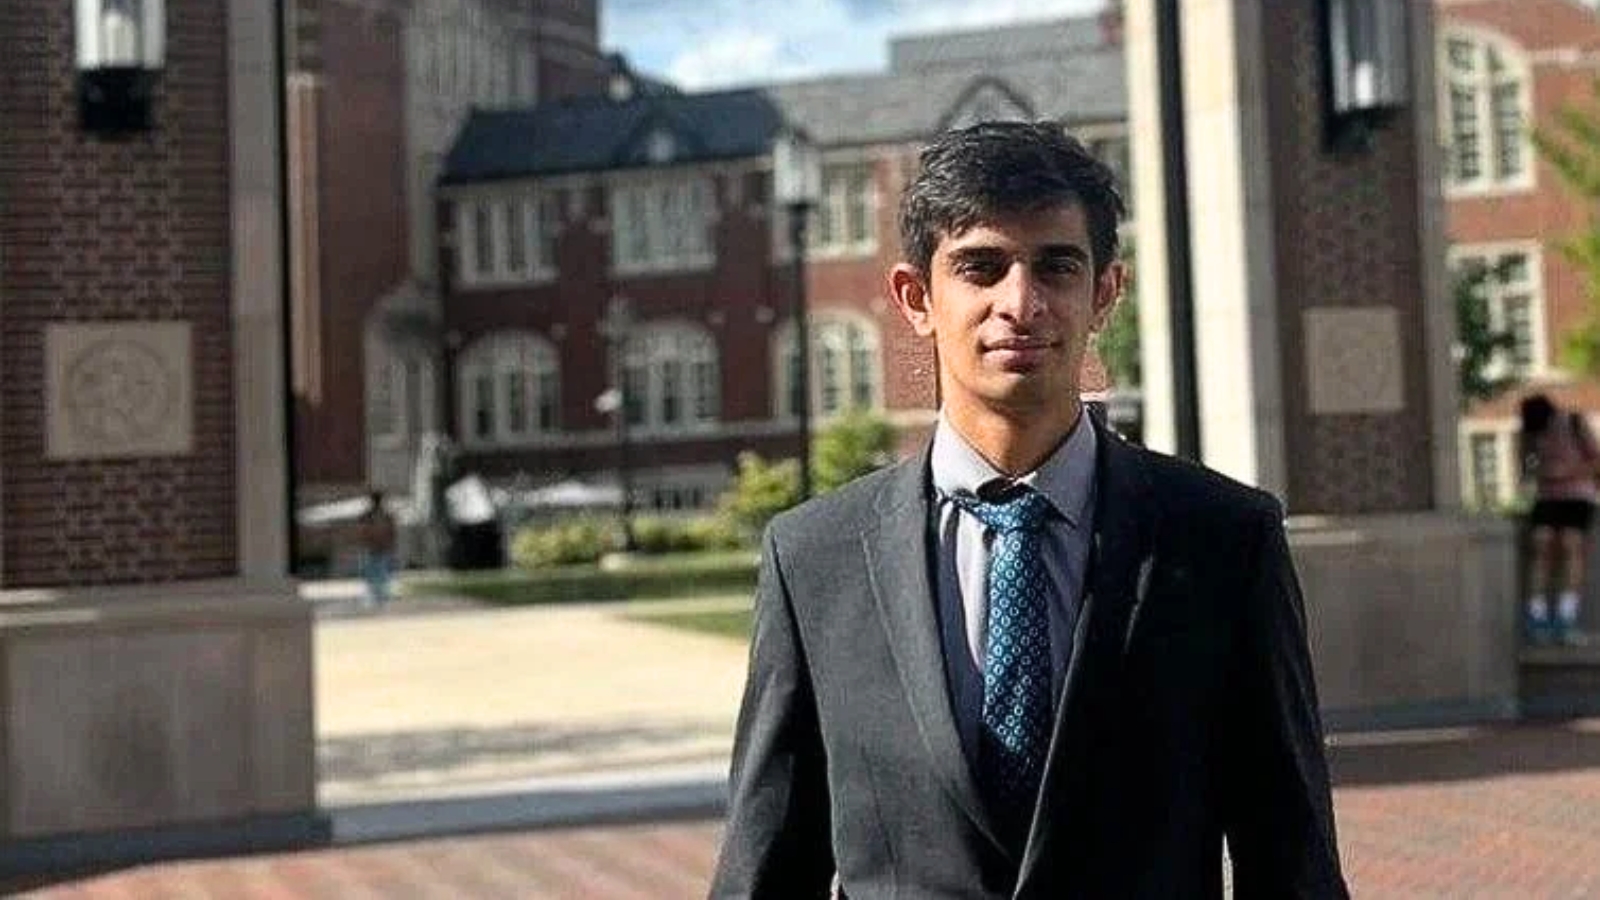 Tragic End for Missing Indian Student Found Dead in Ohio